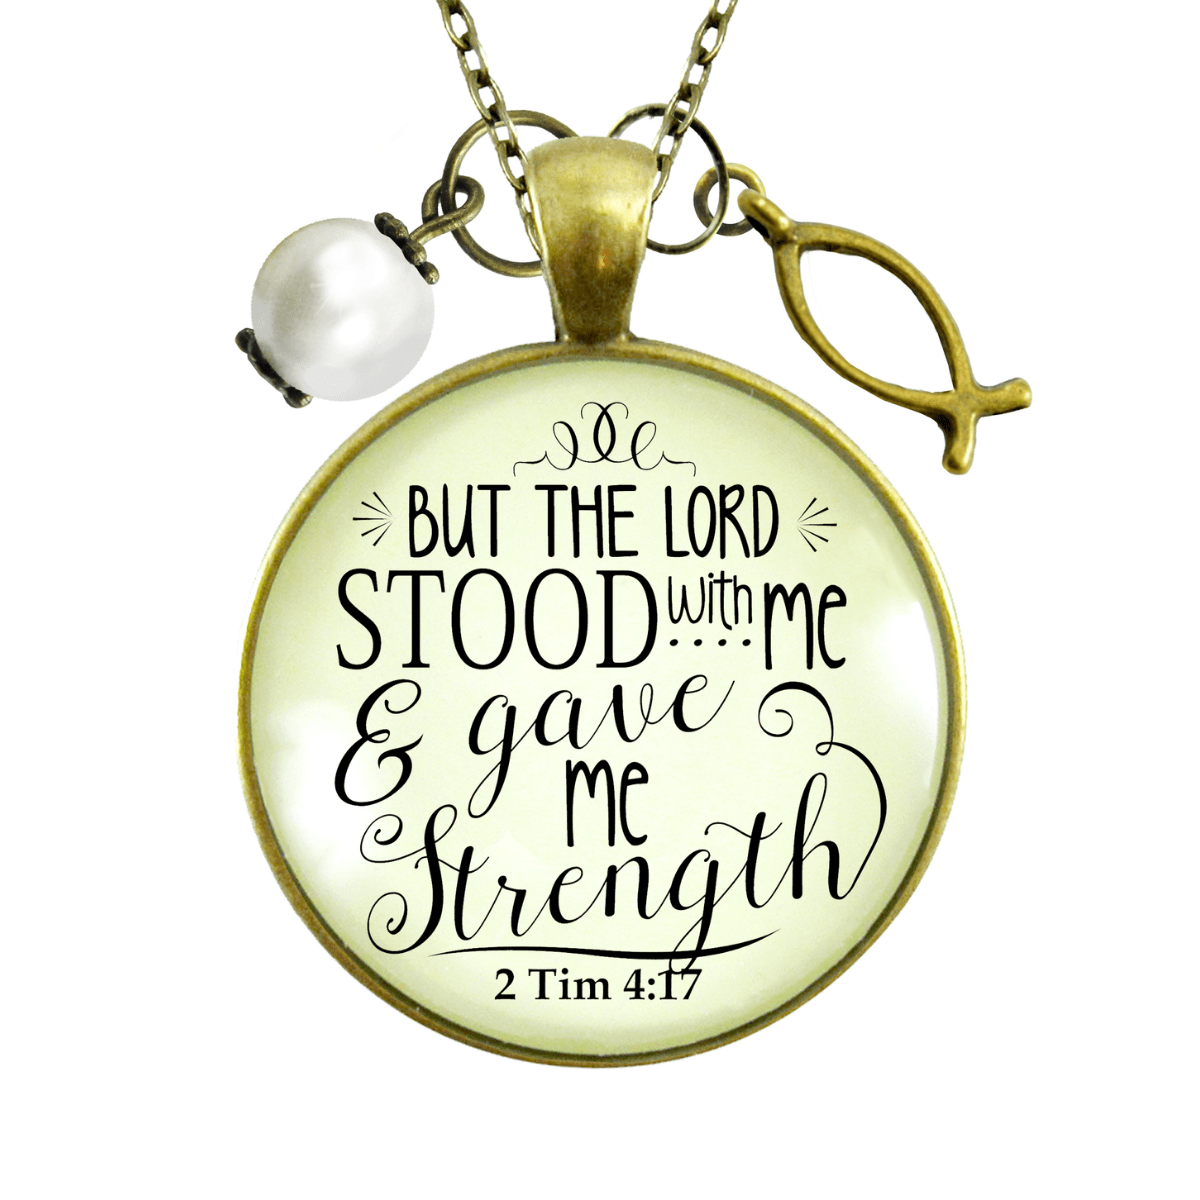 Gutsy Goodness Faith Necklace He Stood By and Gave Strength Encouragement Faith Jewelry - Gutsy Goodness;Faith Necklace He Stood By And Gave Strength Encouragement Faith Jewelry - Gutsy Goodness Handmade Jewelry Gifts